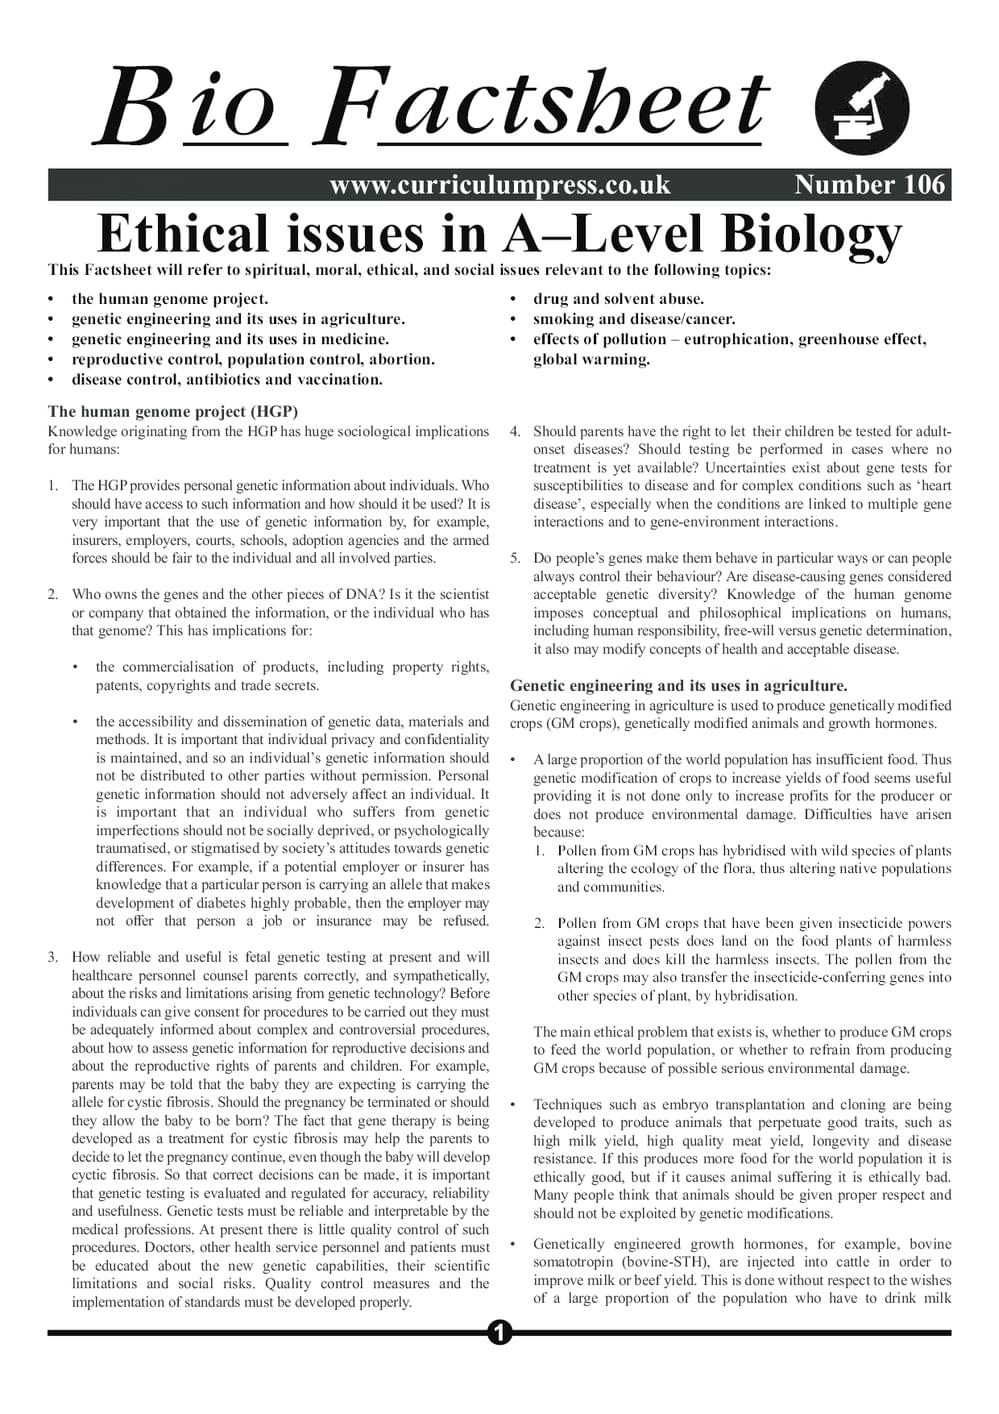 Ethical Issues in A-Level Biology - Curriculum Press